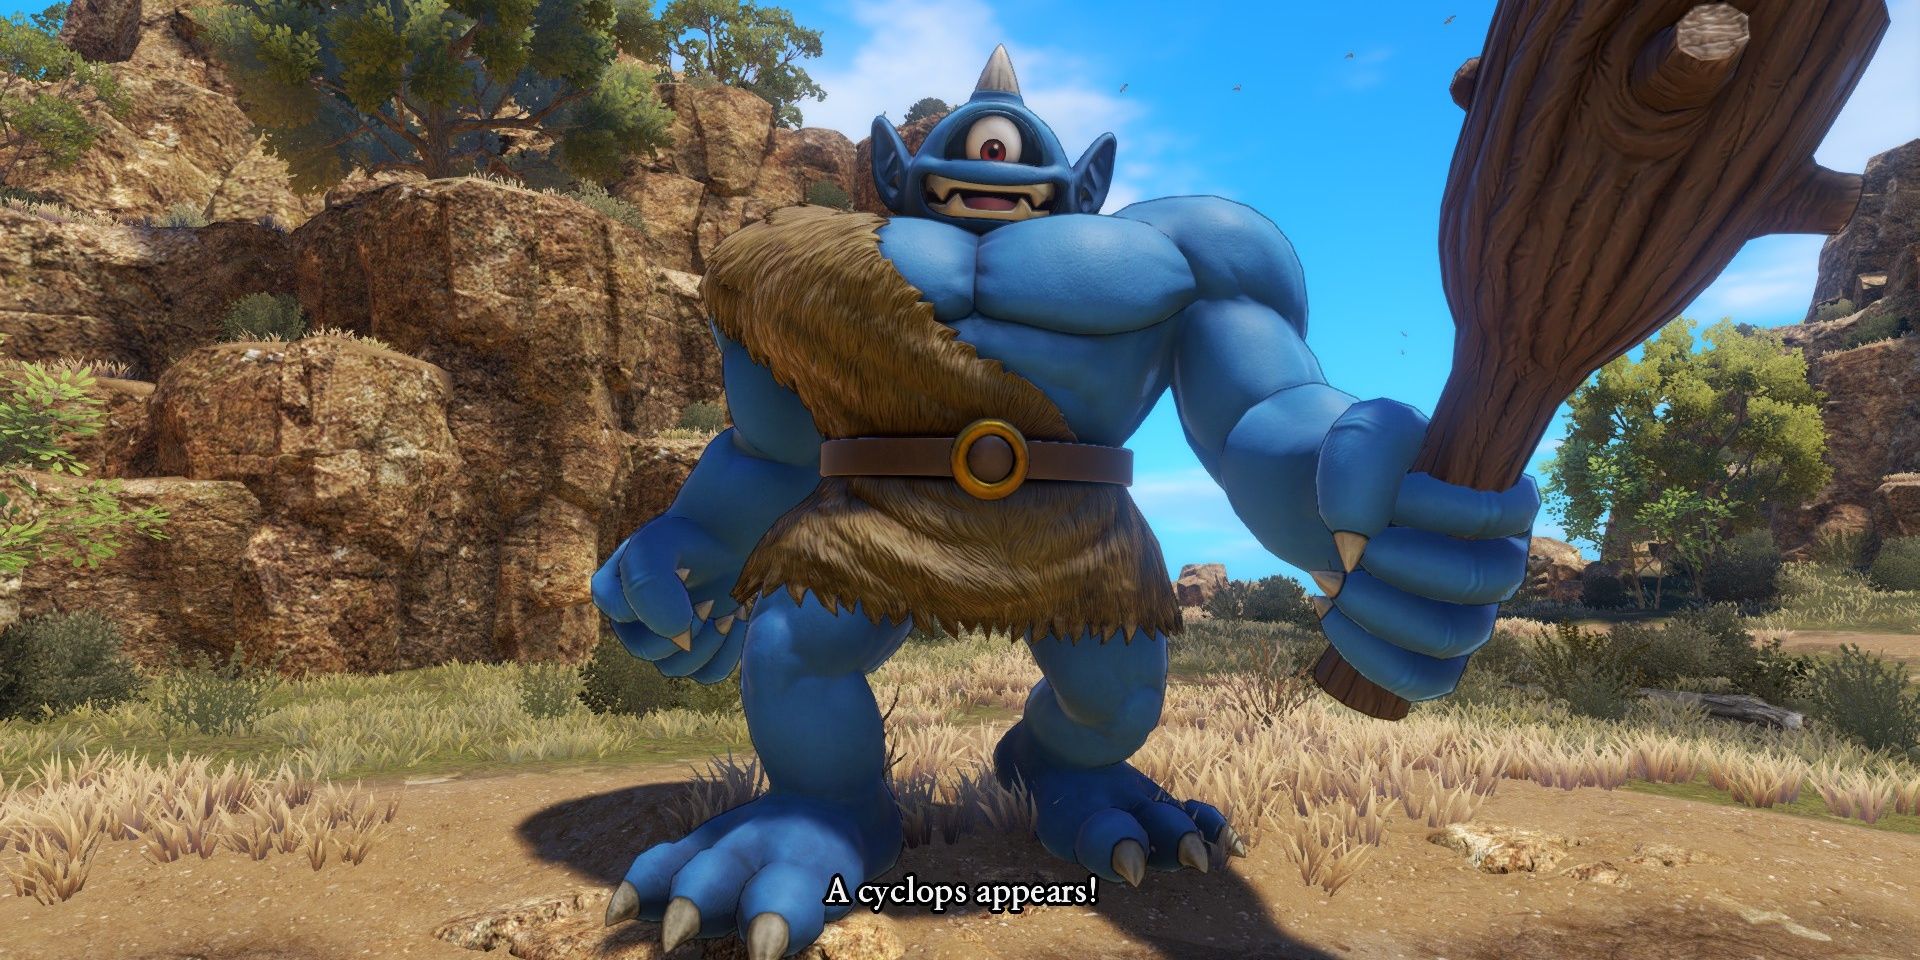 A Cyclops appearing in Dragon Quest XI